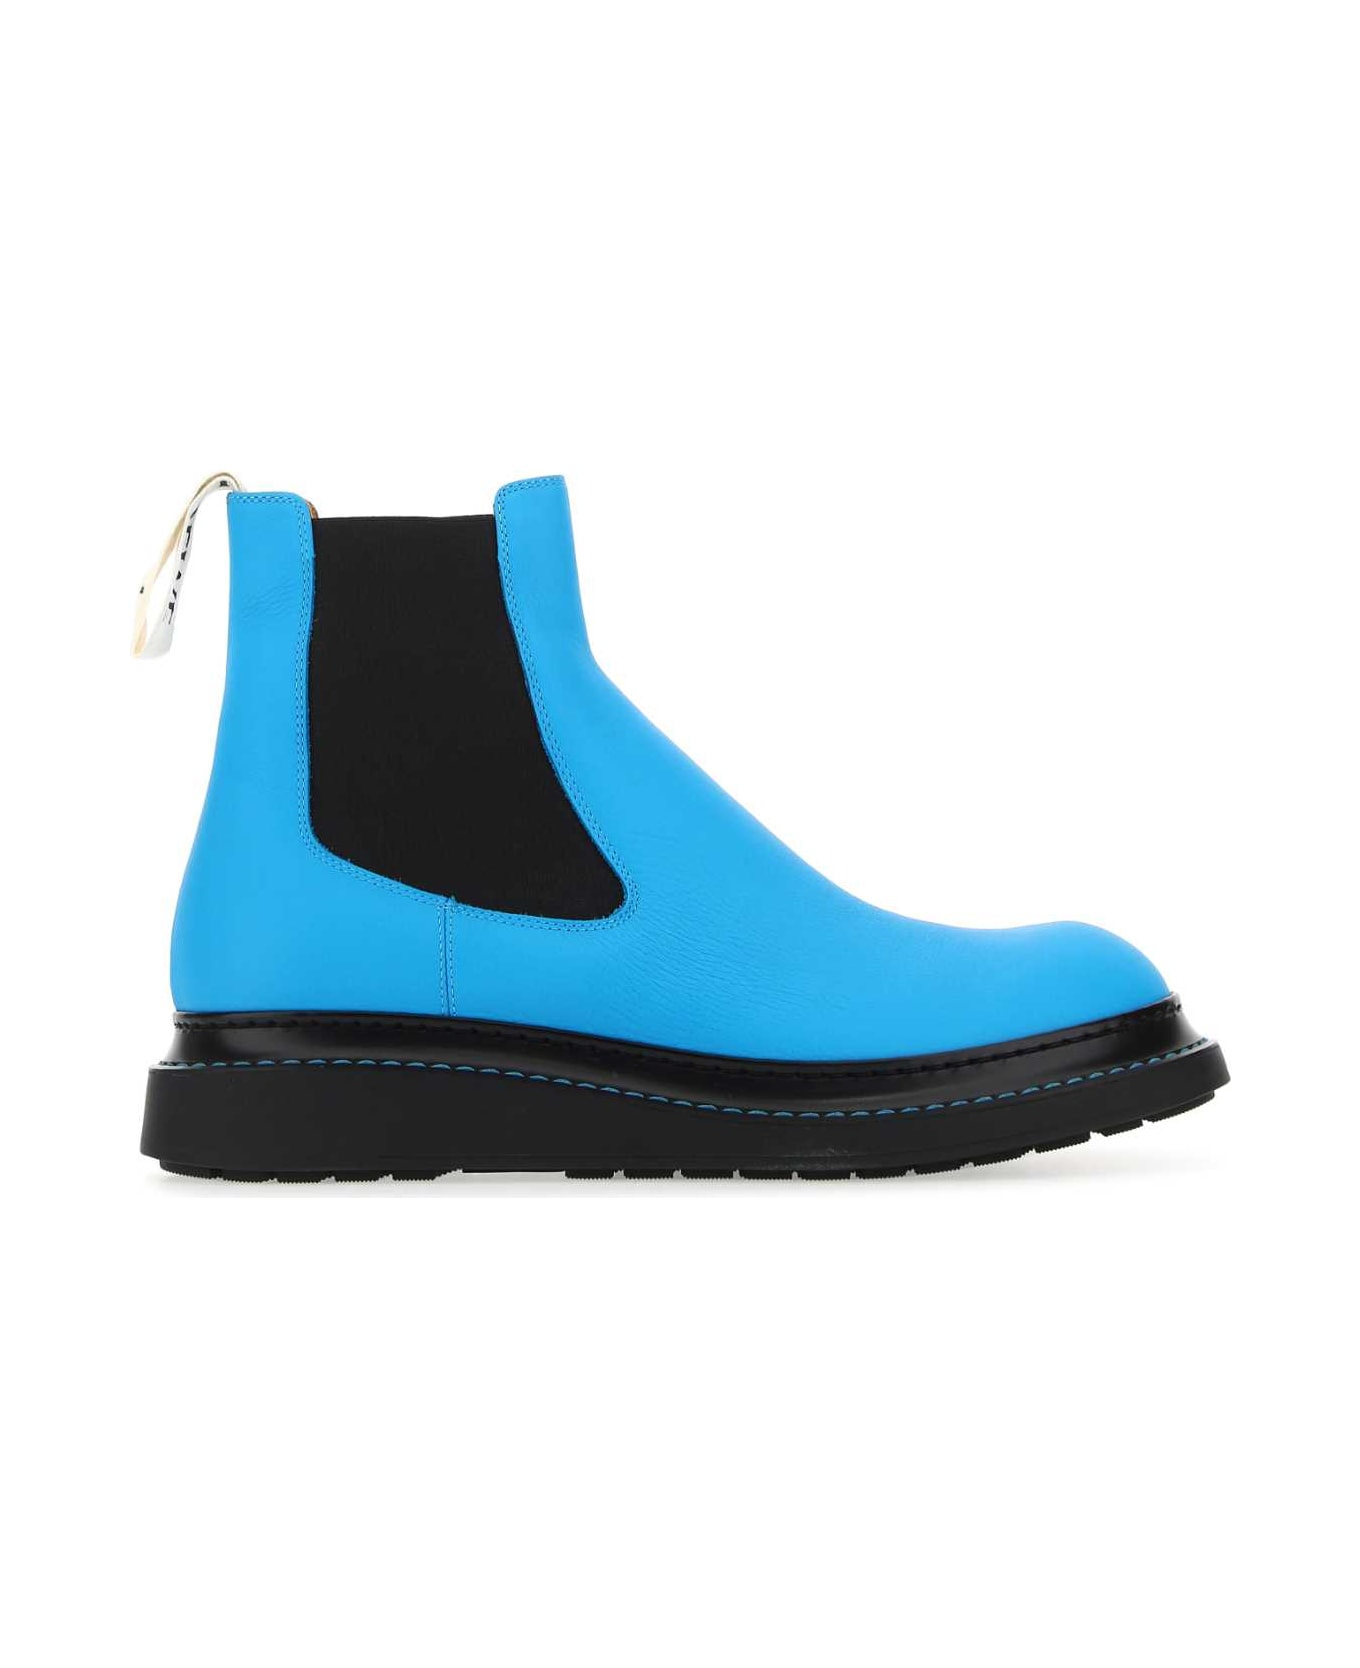 Loewe Fluo Light-blue Leather Ankle Boots - CYAN